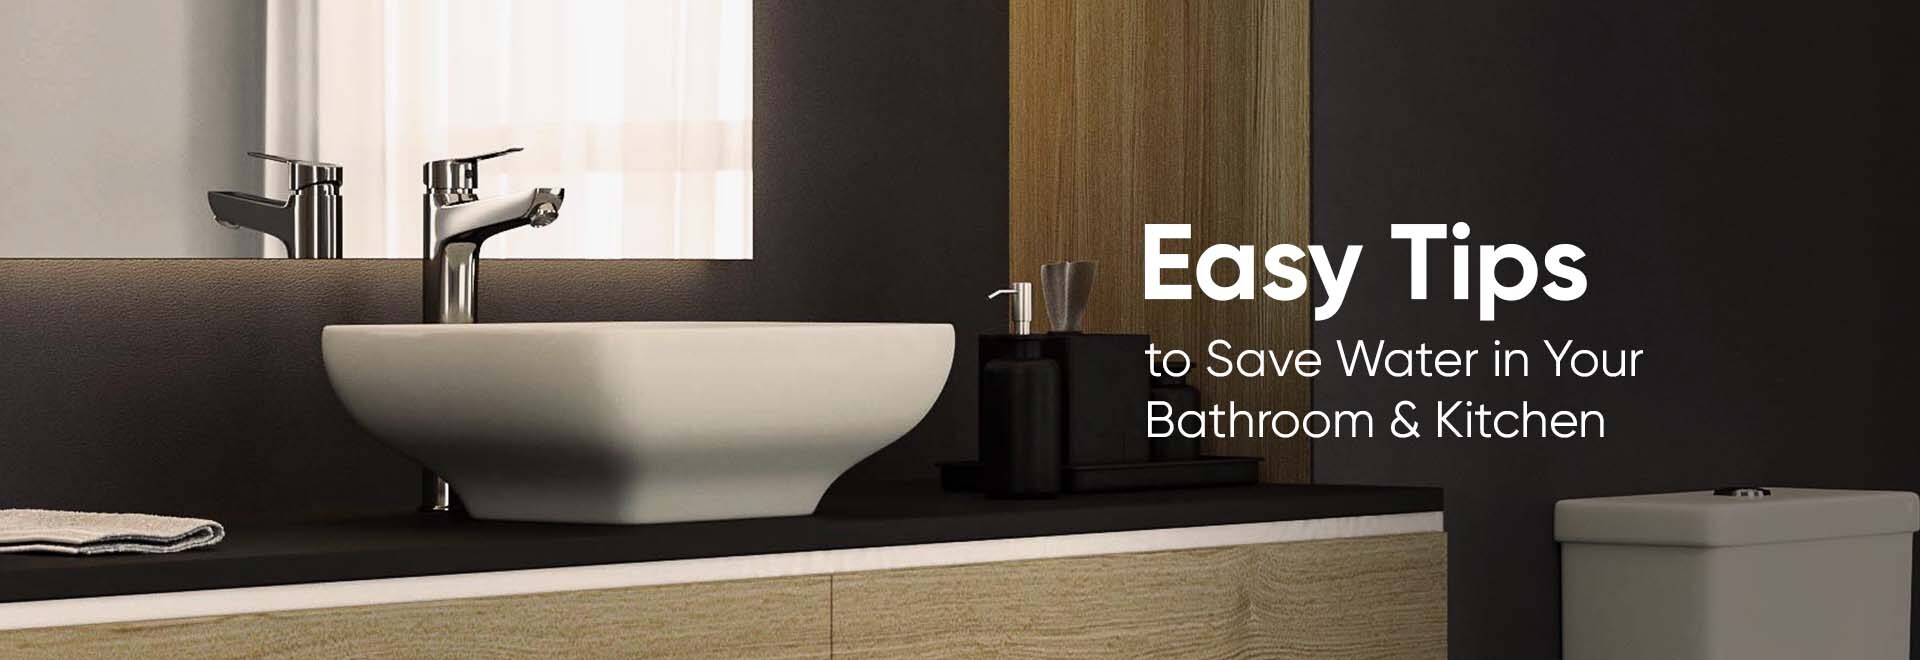 6 Easy Tips to Save Water in Your Bathroom & Kitchen